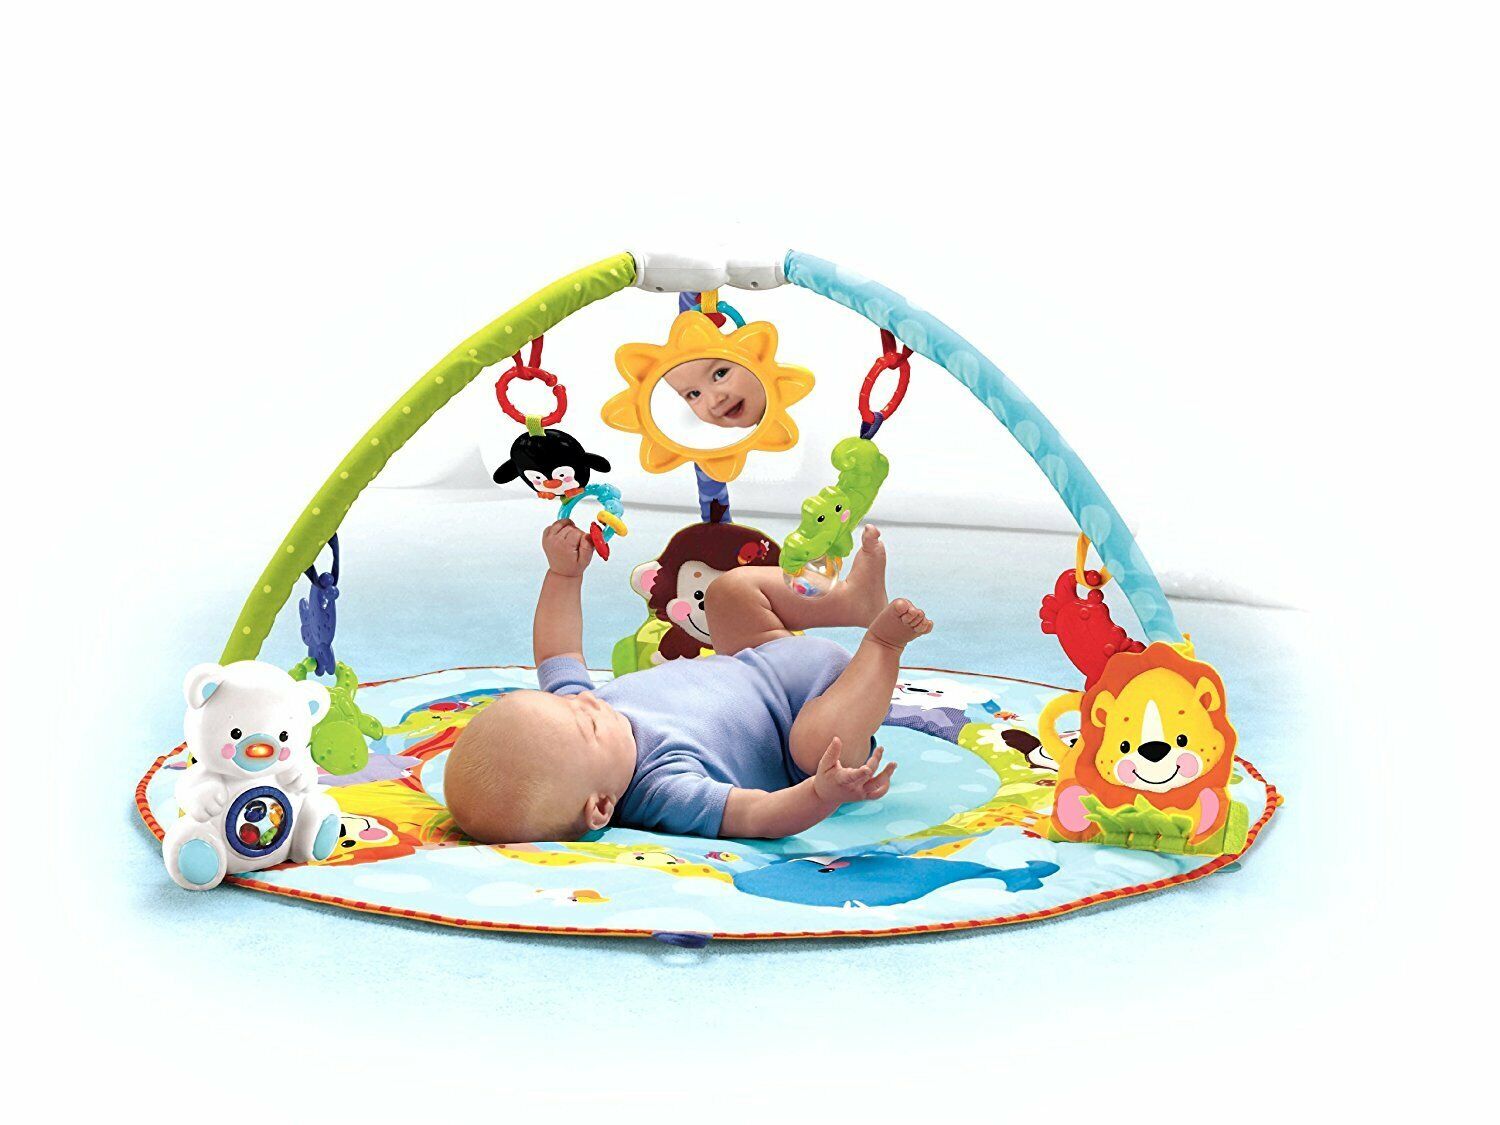 100cm Large Baby Deluxe Musical Baby Gym Play Mats Kick & Play Gym Infants Baby Toy play mat - Homeware Discounts